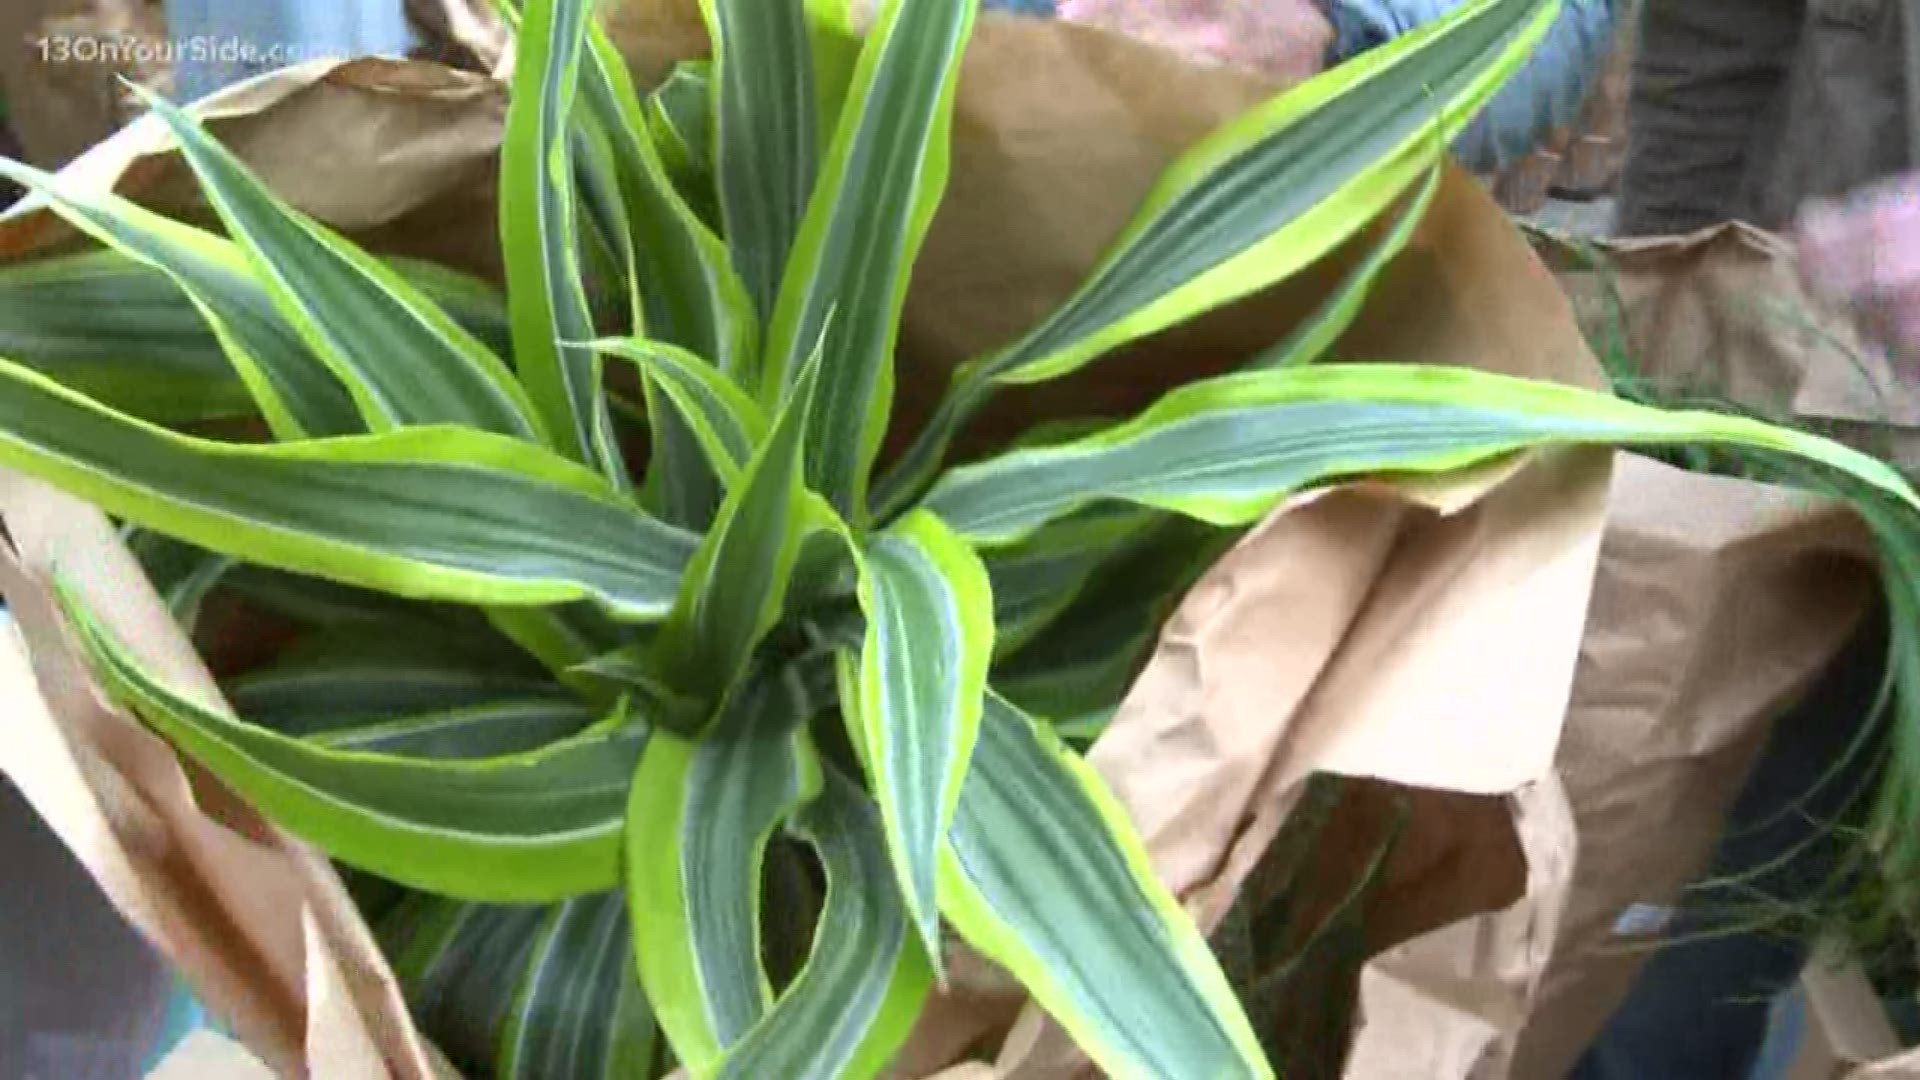 Our greenthumb expert Rick Vuyst explains which house plants might be right for you.